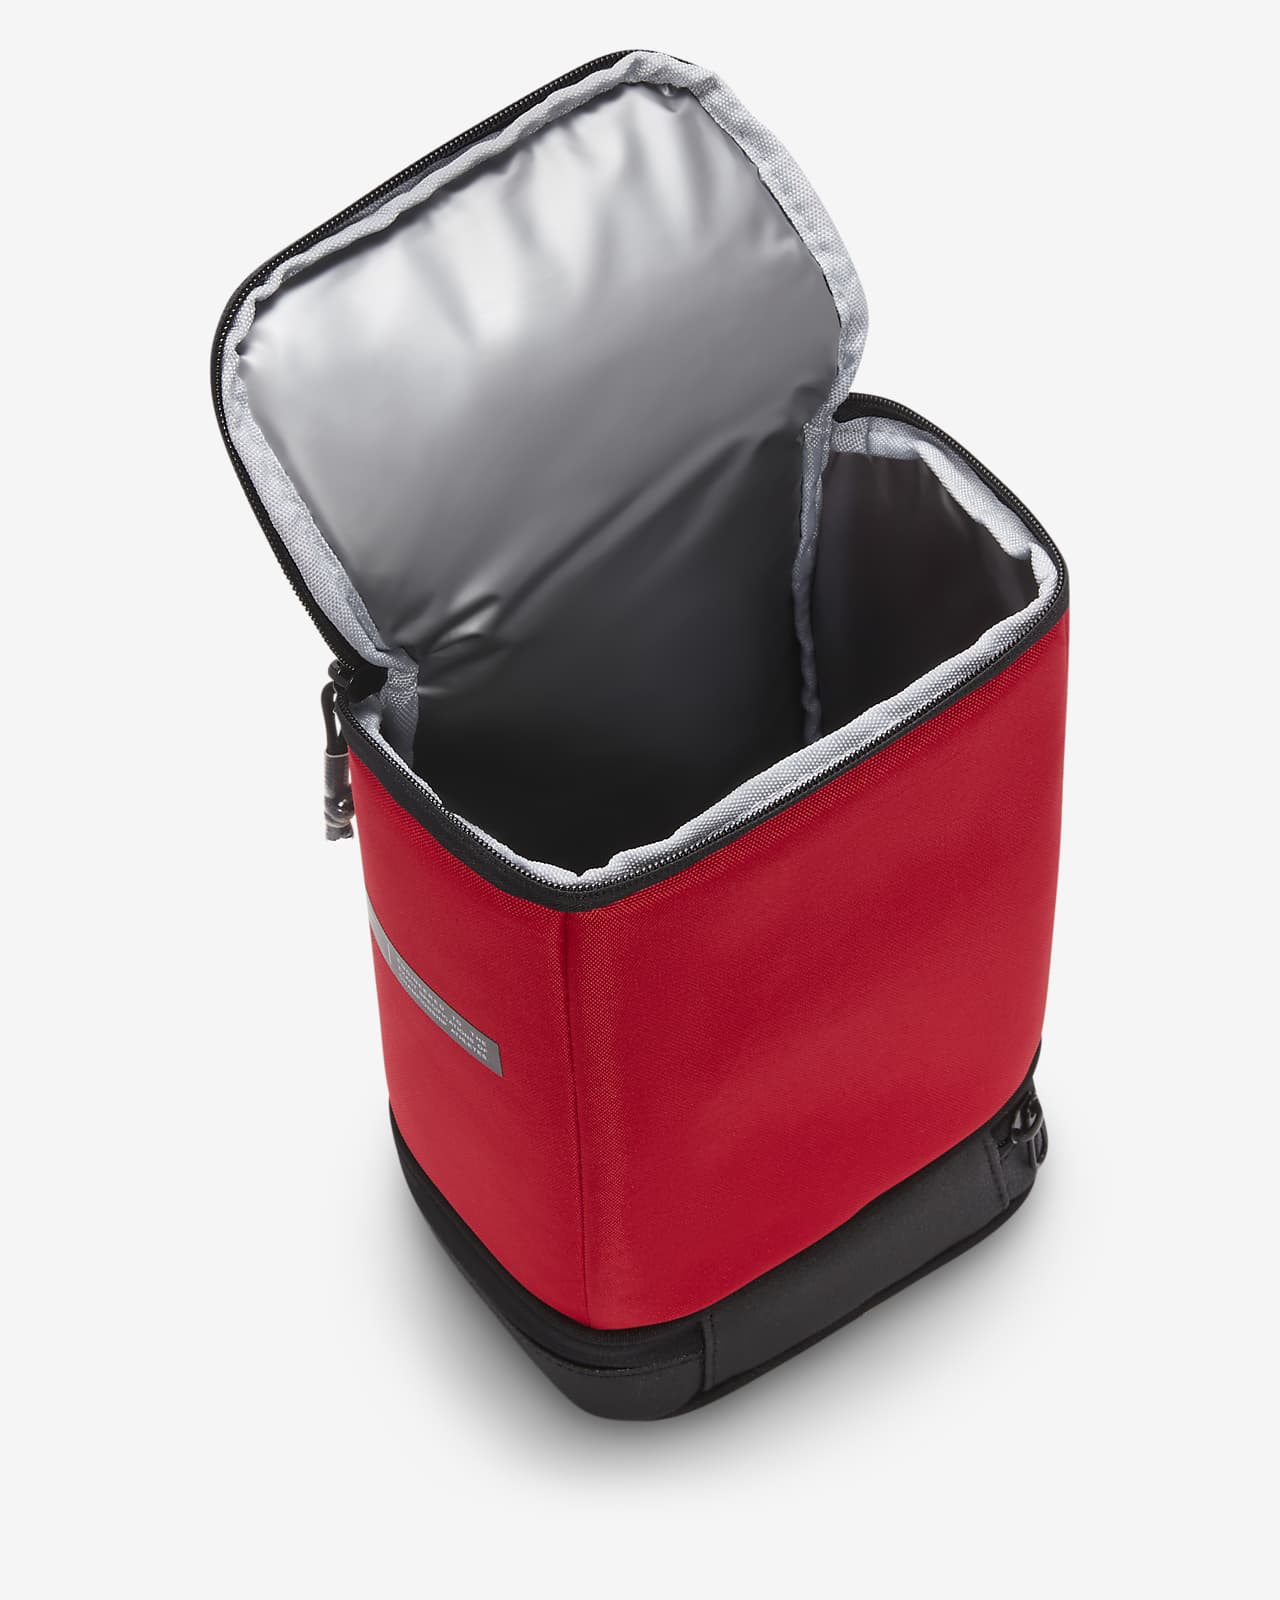 NIKE LUNCH BOX BAG WITH COOLER PADDING ON THE INSIDE - RED